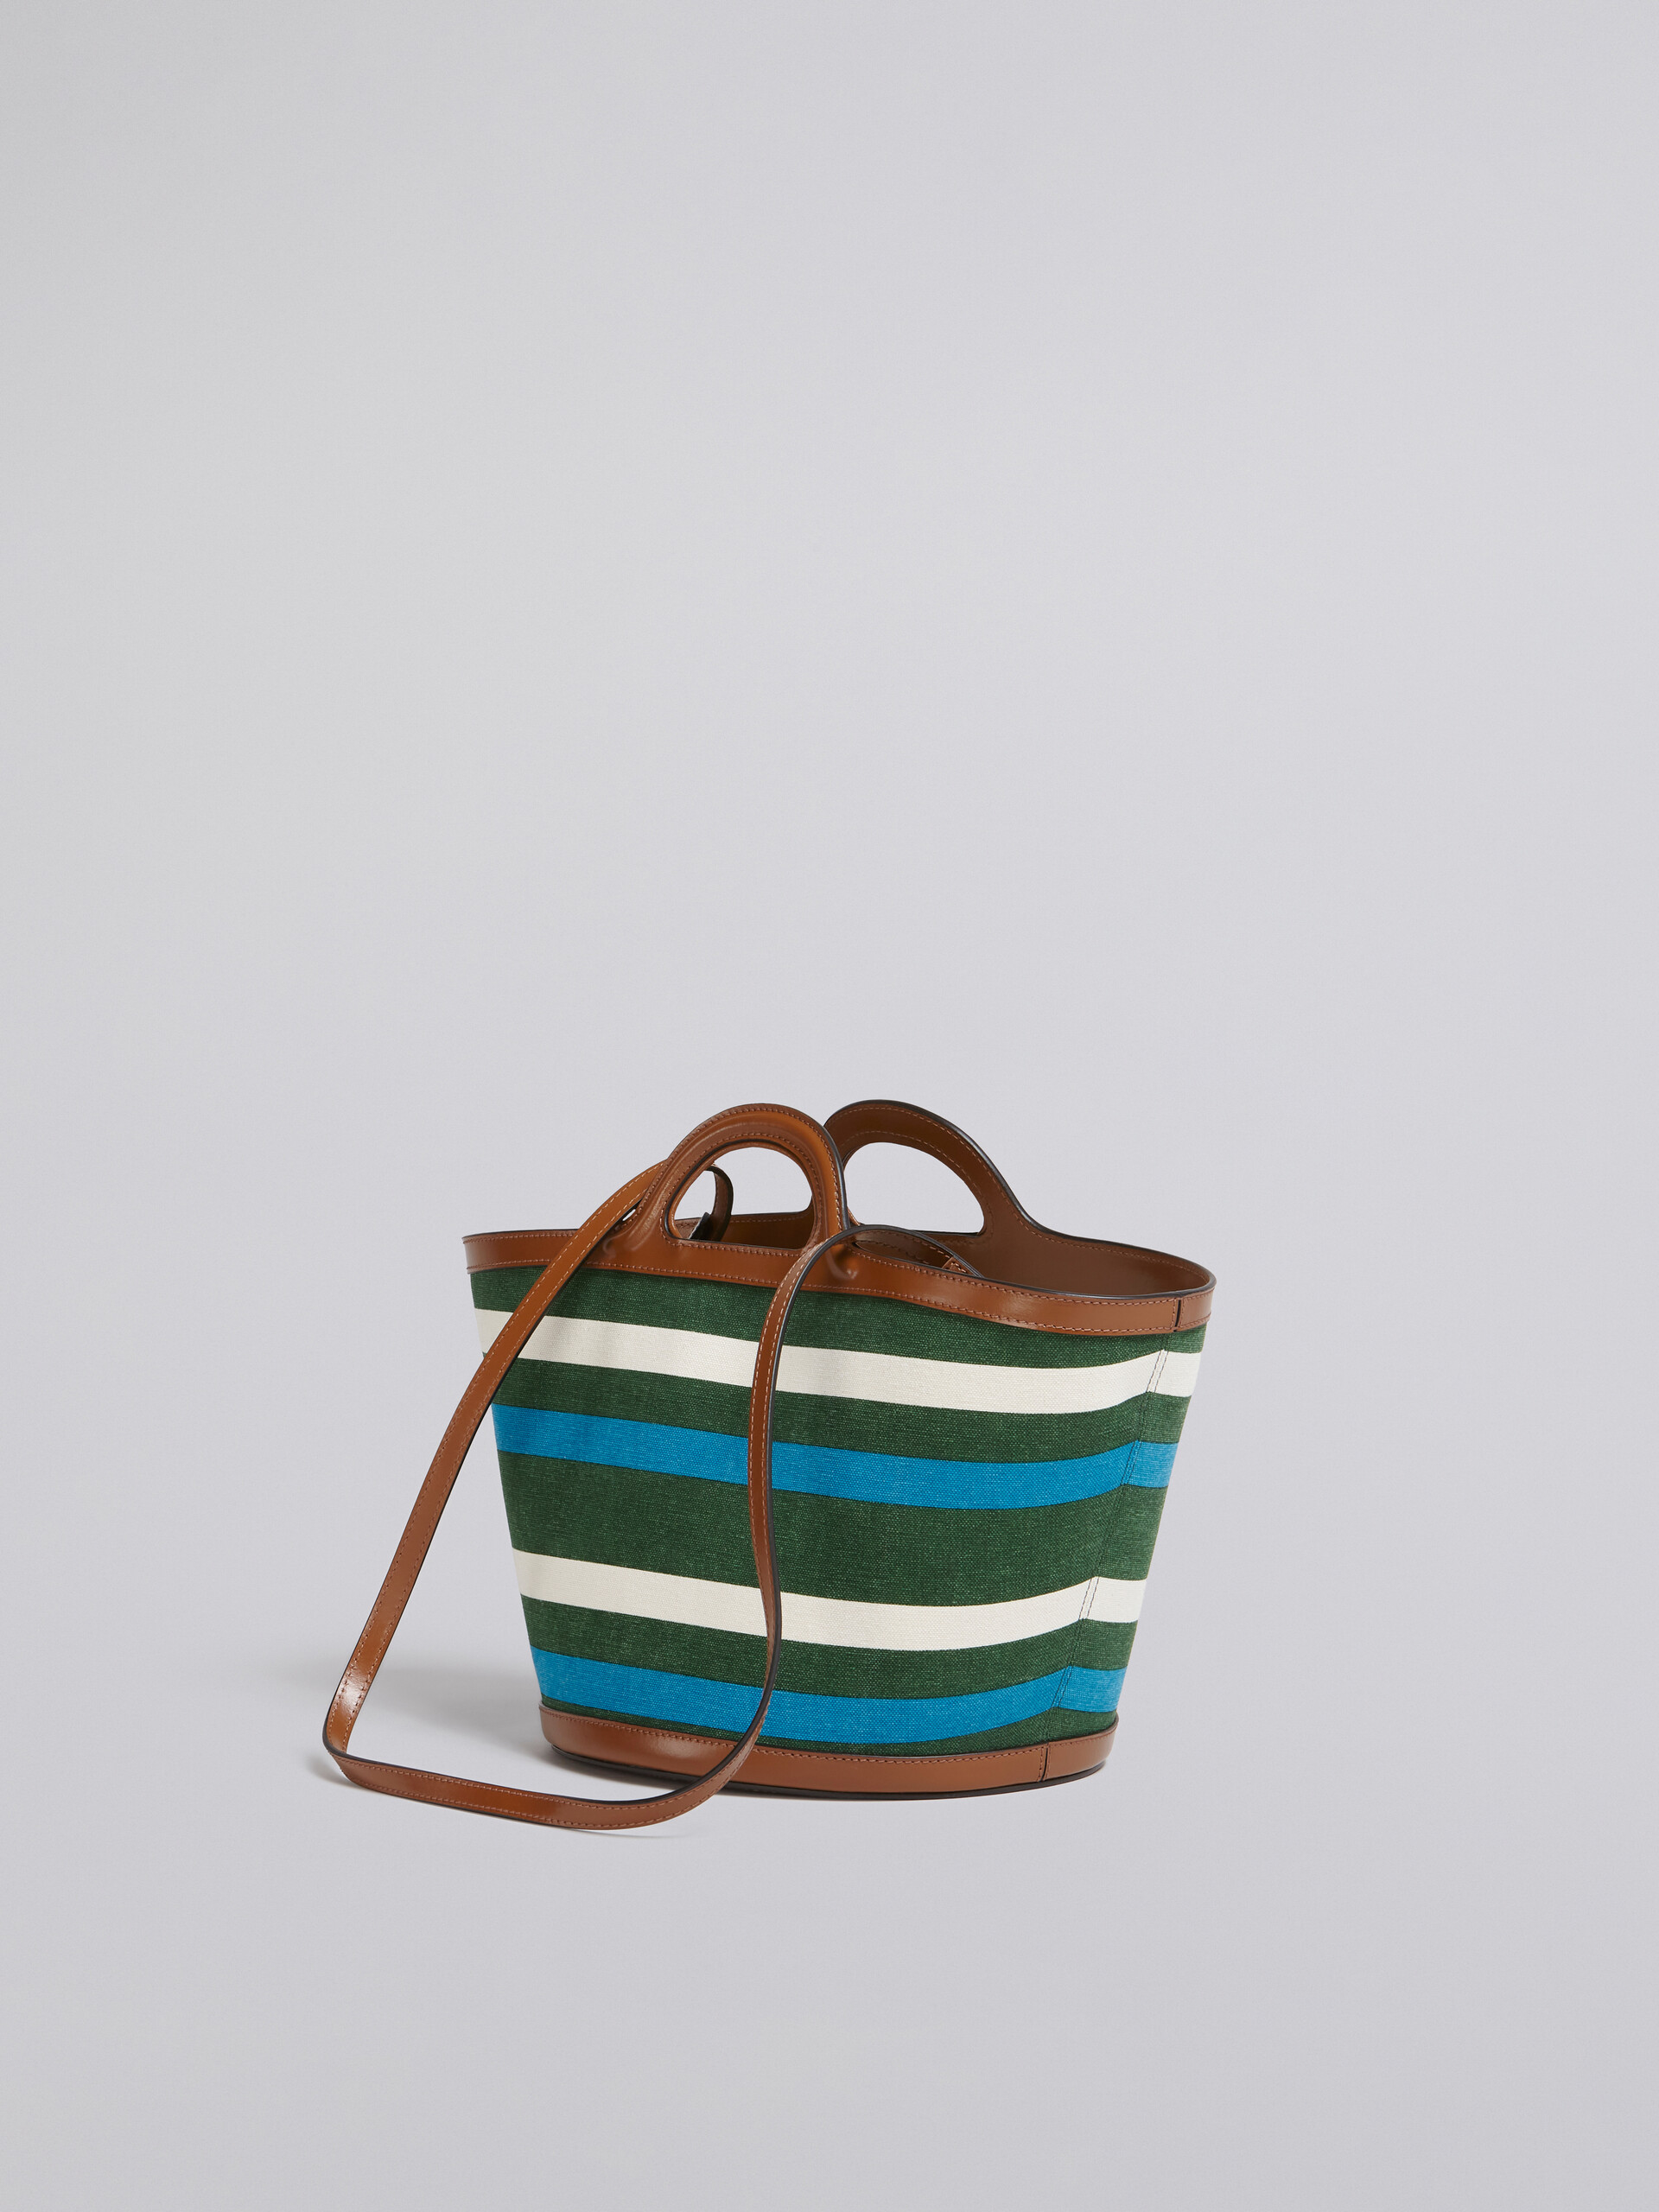 TROPICALIA small bag in leather and striped canvas - Handbag - Image 3